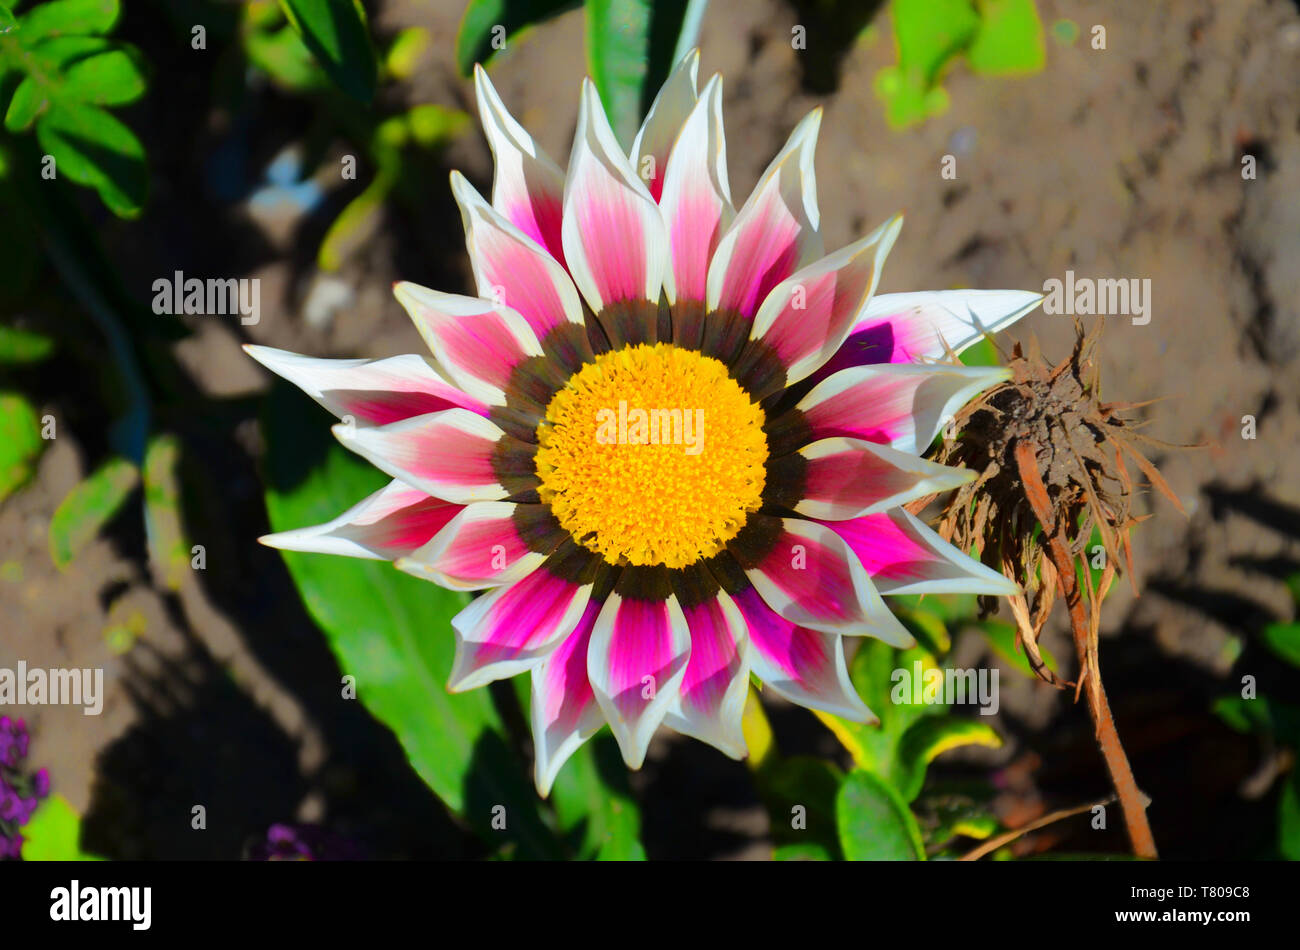 Beautiful detail of pink and white Gazania Big Kiss White Flame taken from above. Gazania linearis is a species of flowering plant in the daisy family known by the common name treasure flower. Stock Photo